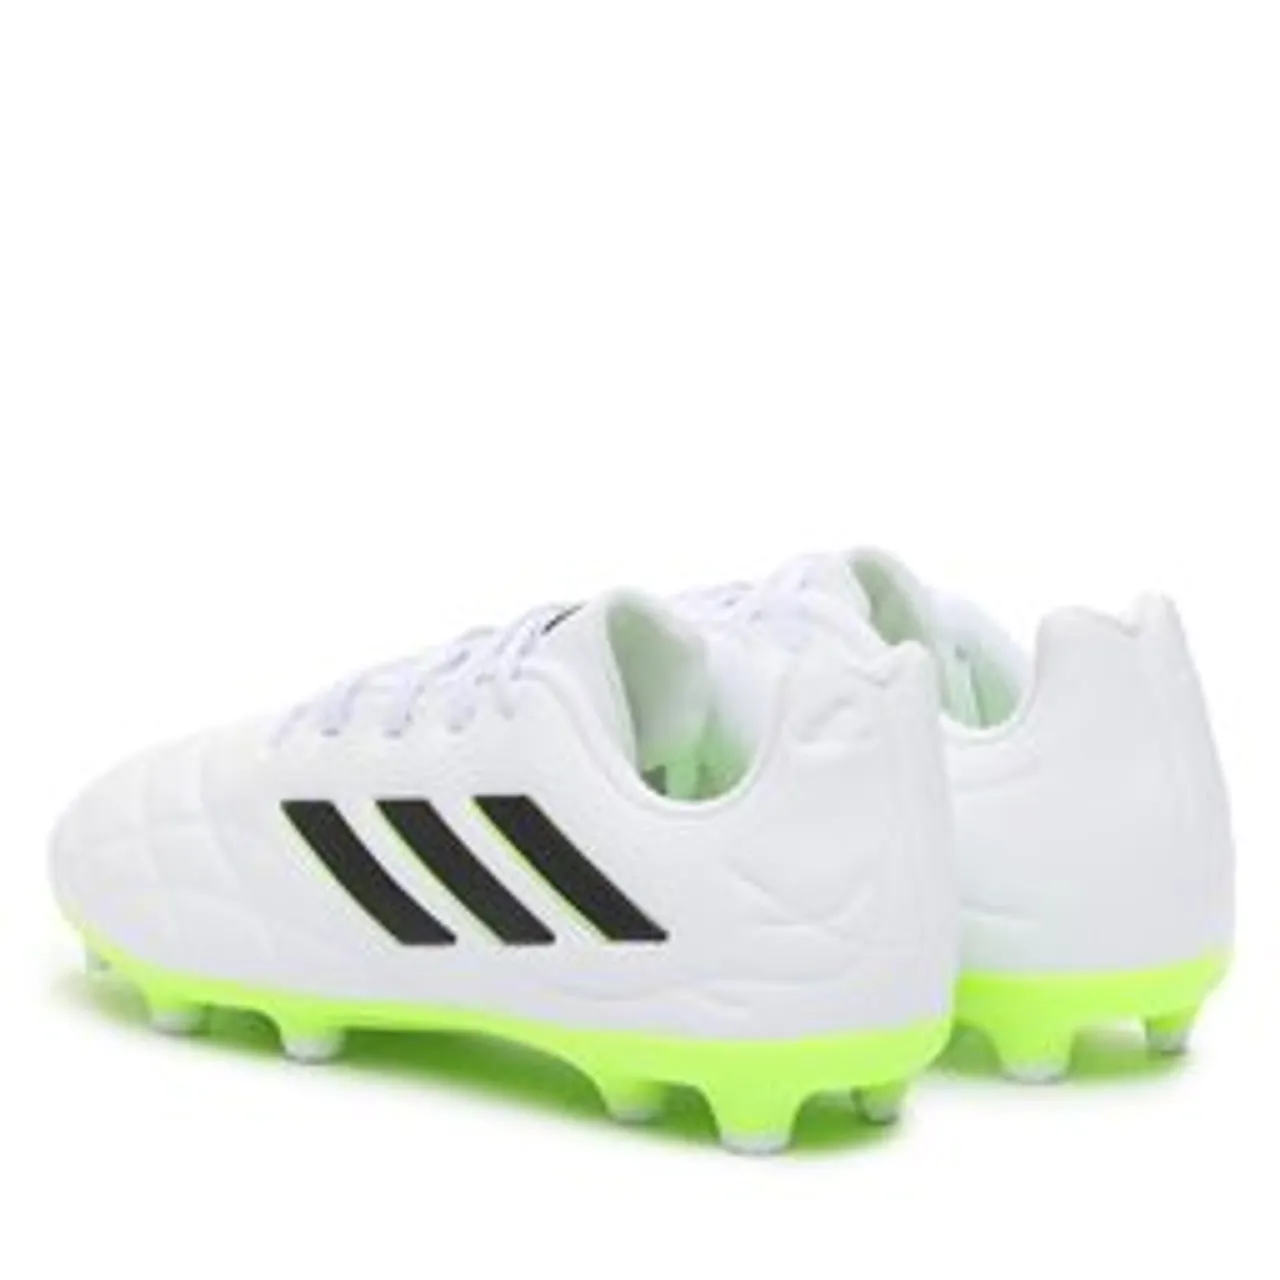 Schuhe adidas Copa Pure II.3 Firm Ground Boots HQ8989 Ftwwht/Cblack/Luclem